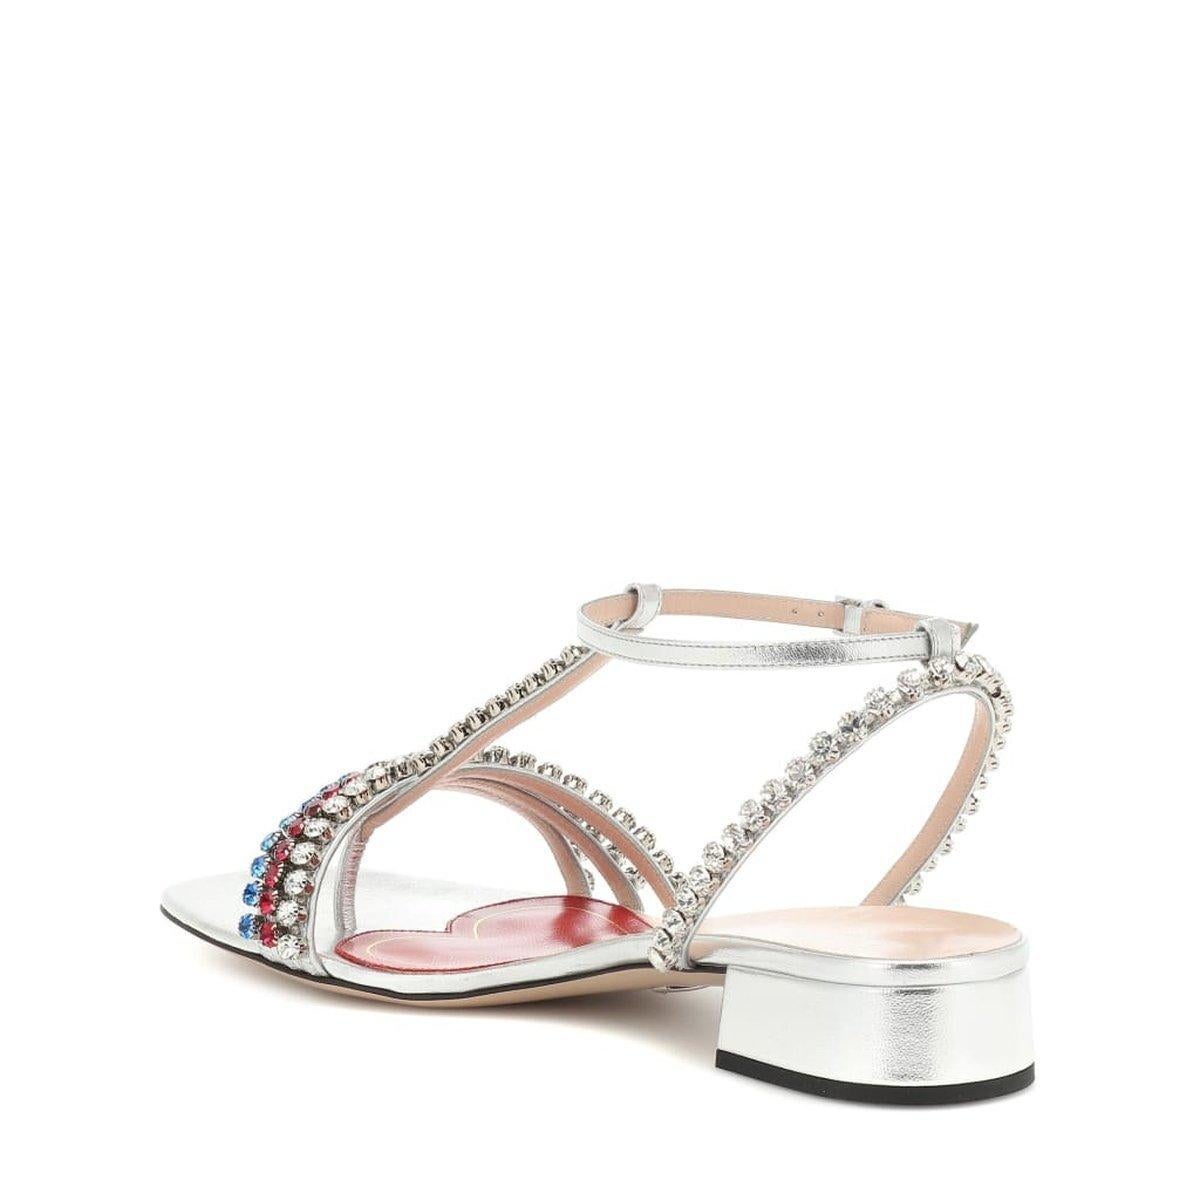 Gucci Bertie Embellished Metallic Leather Sandals IT 37 For Sale 1